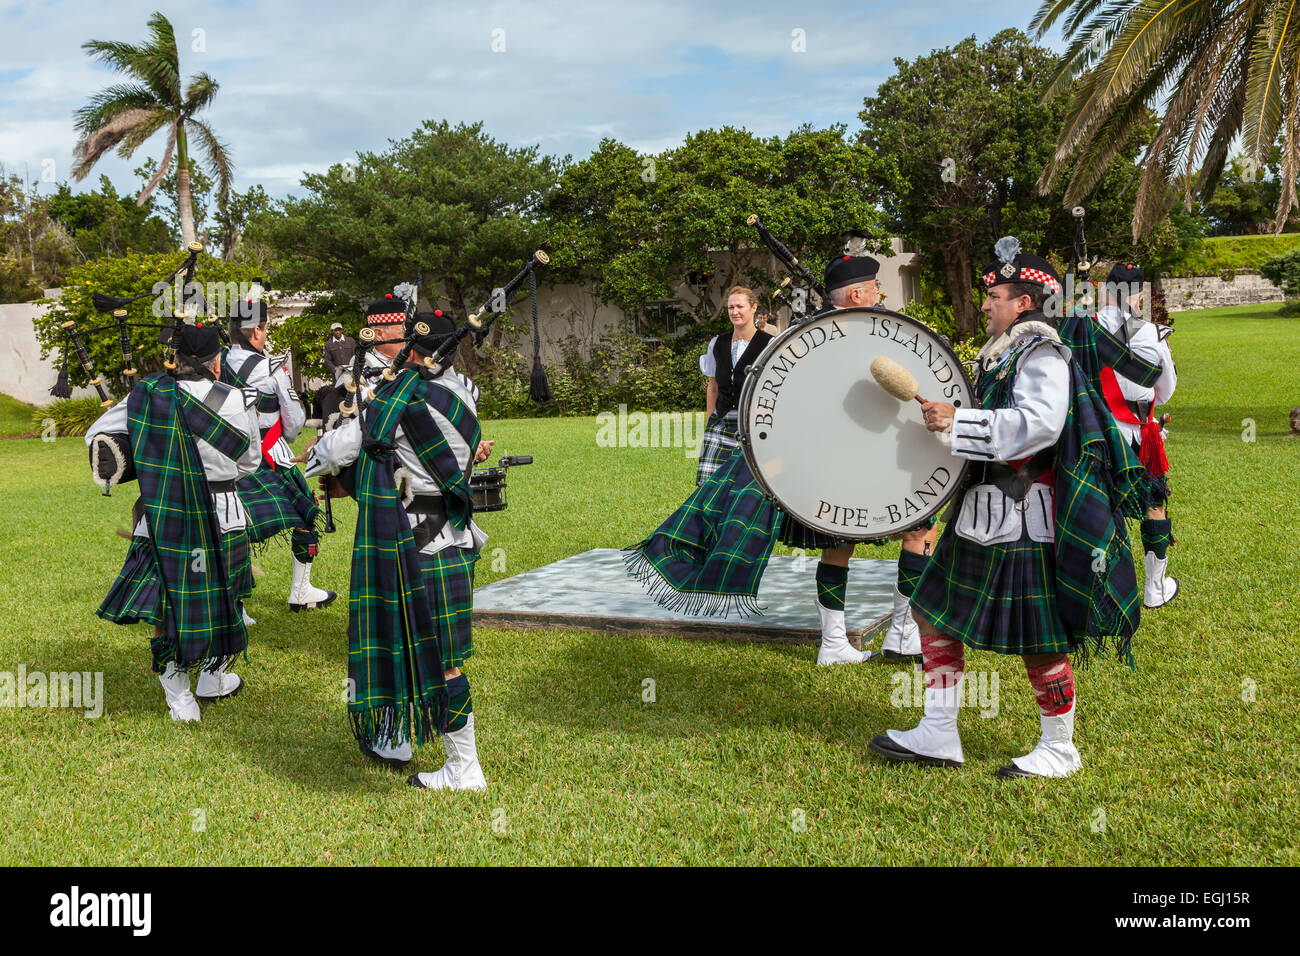 Kilted members of the Bermuda Islands Pipe Band as well as a highland dancer at Fort Hamilton in Hamilton, Bermuda. Stock Photo